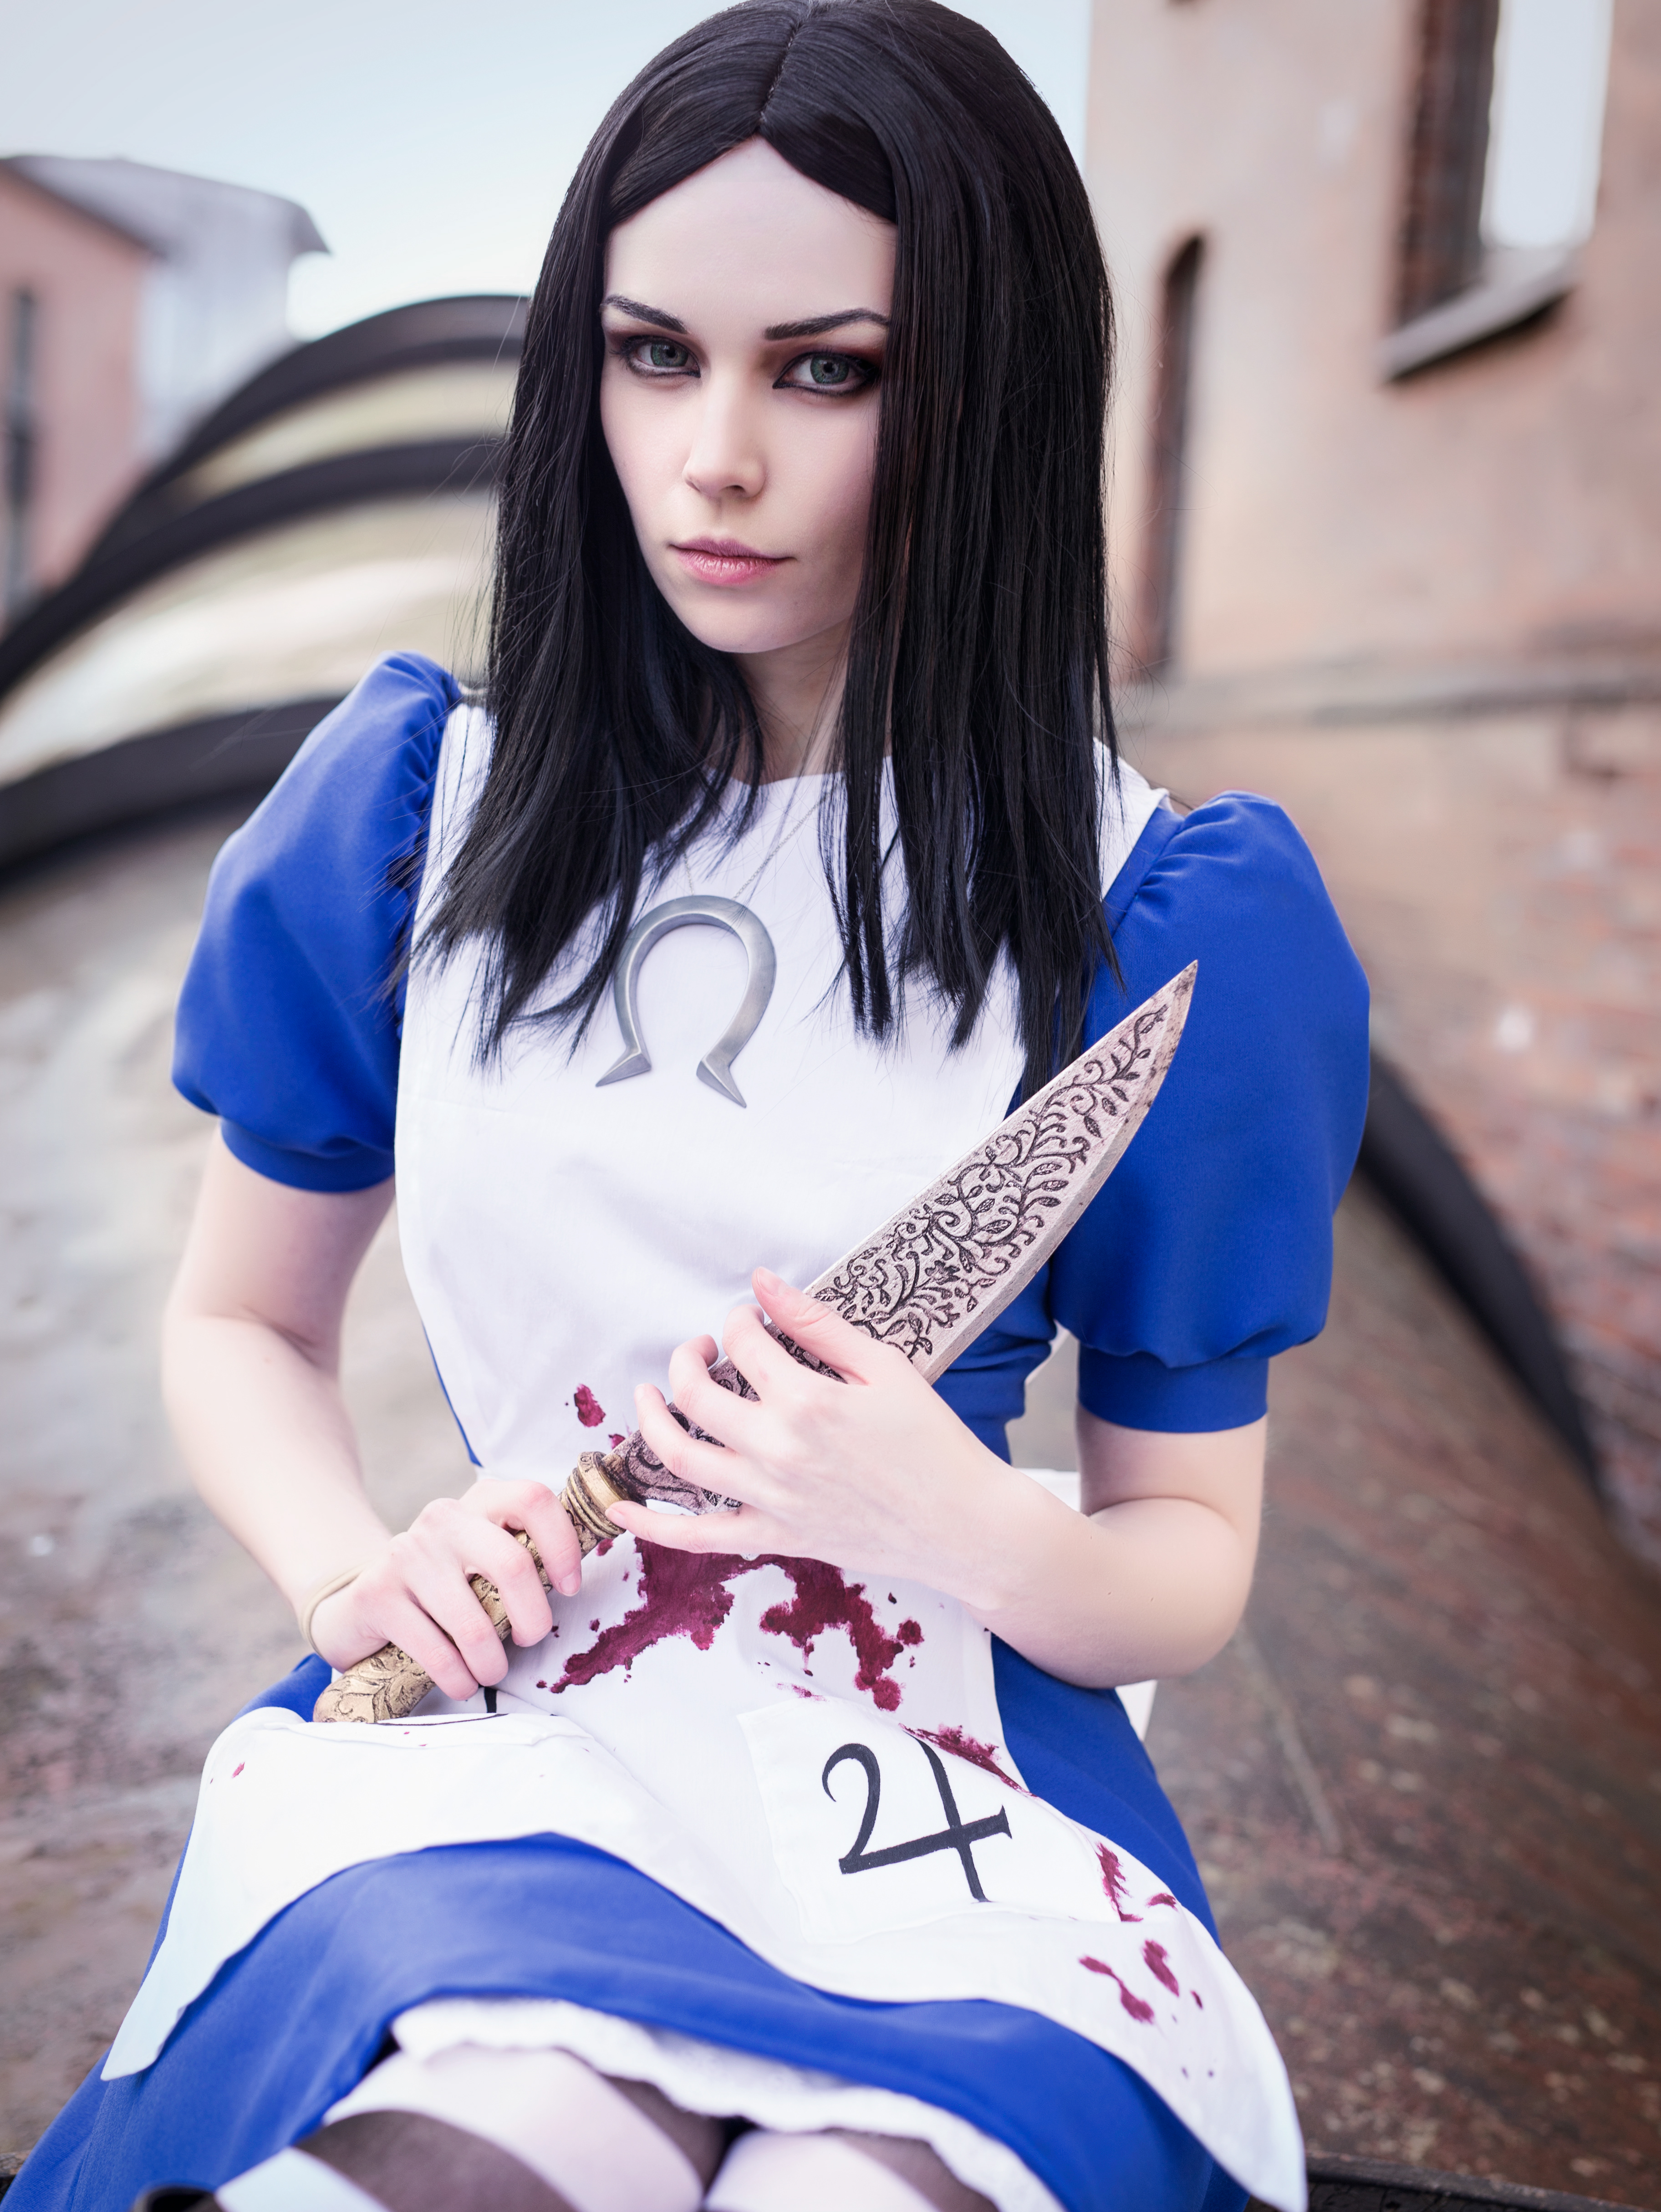 How long is Alice: Madness Returns?